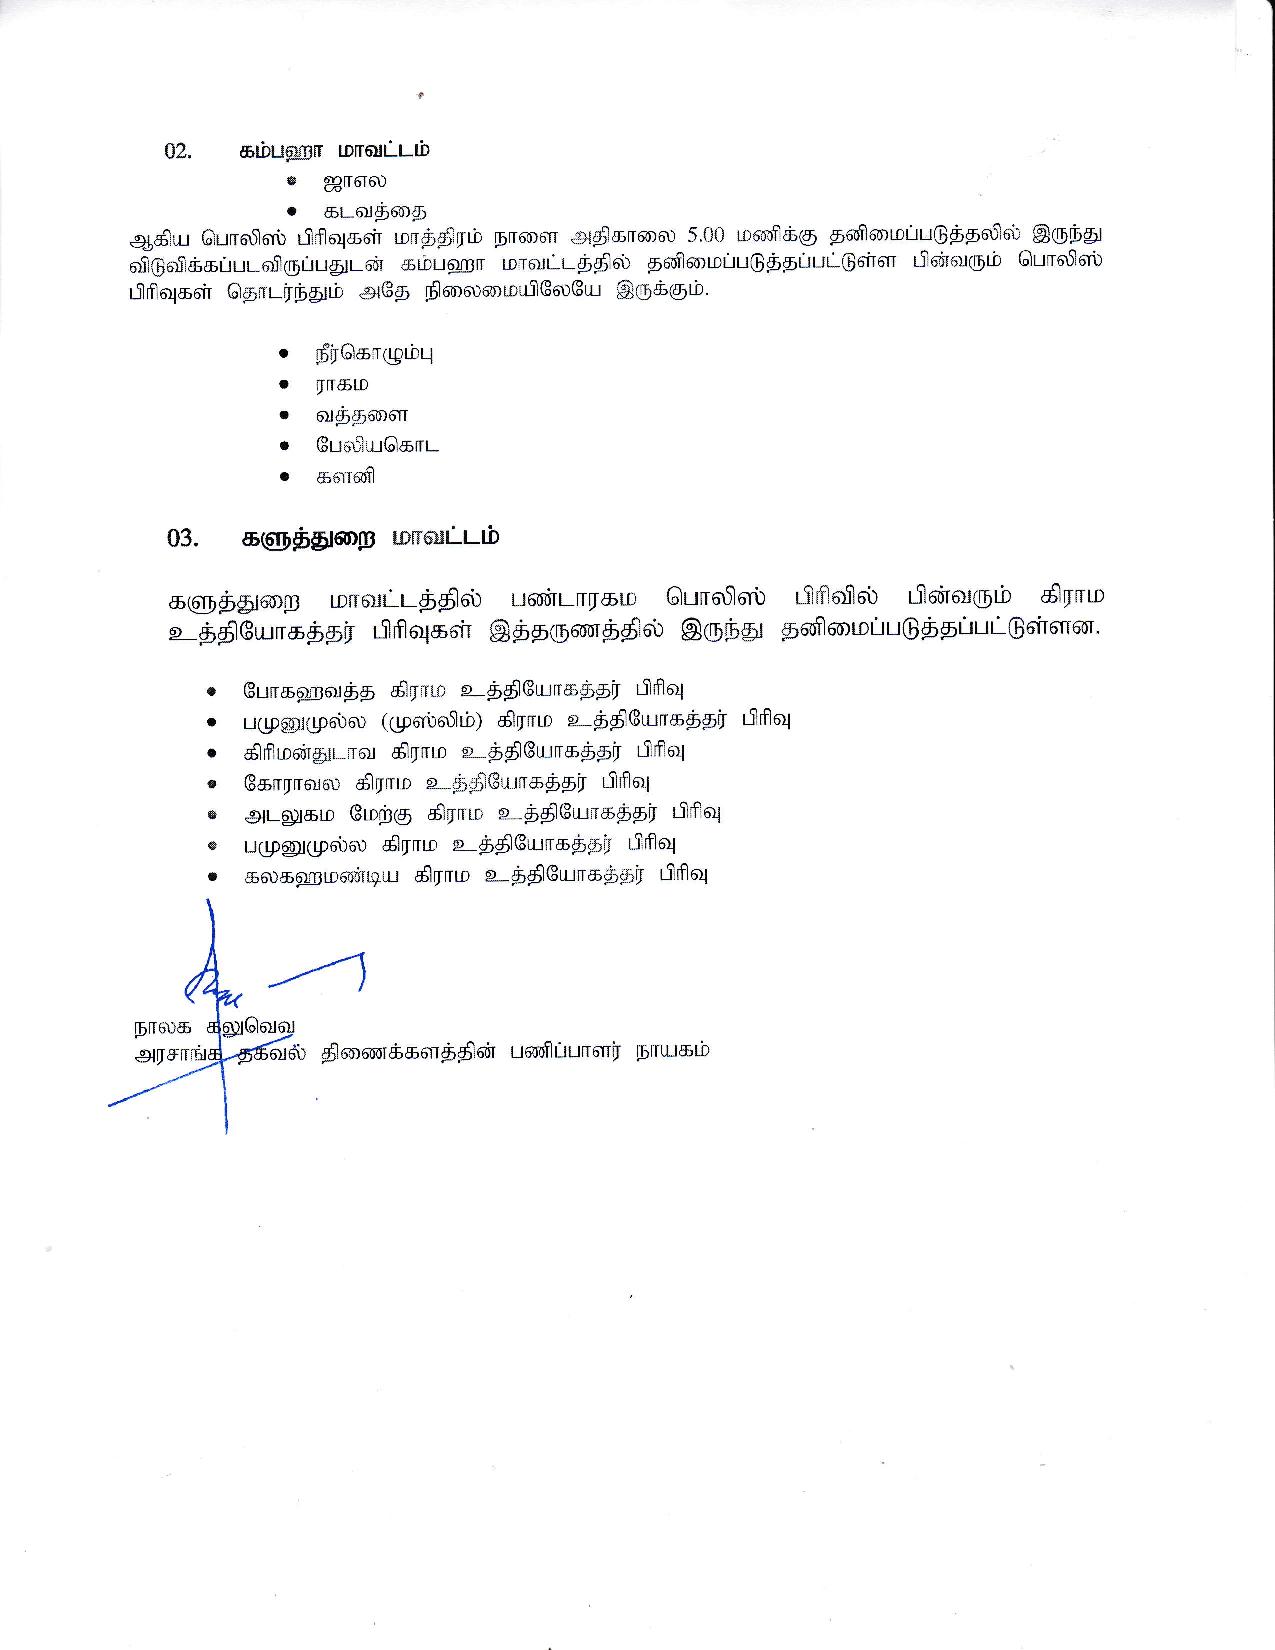 Release No 459 Tamil page 002